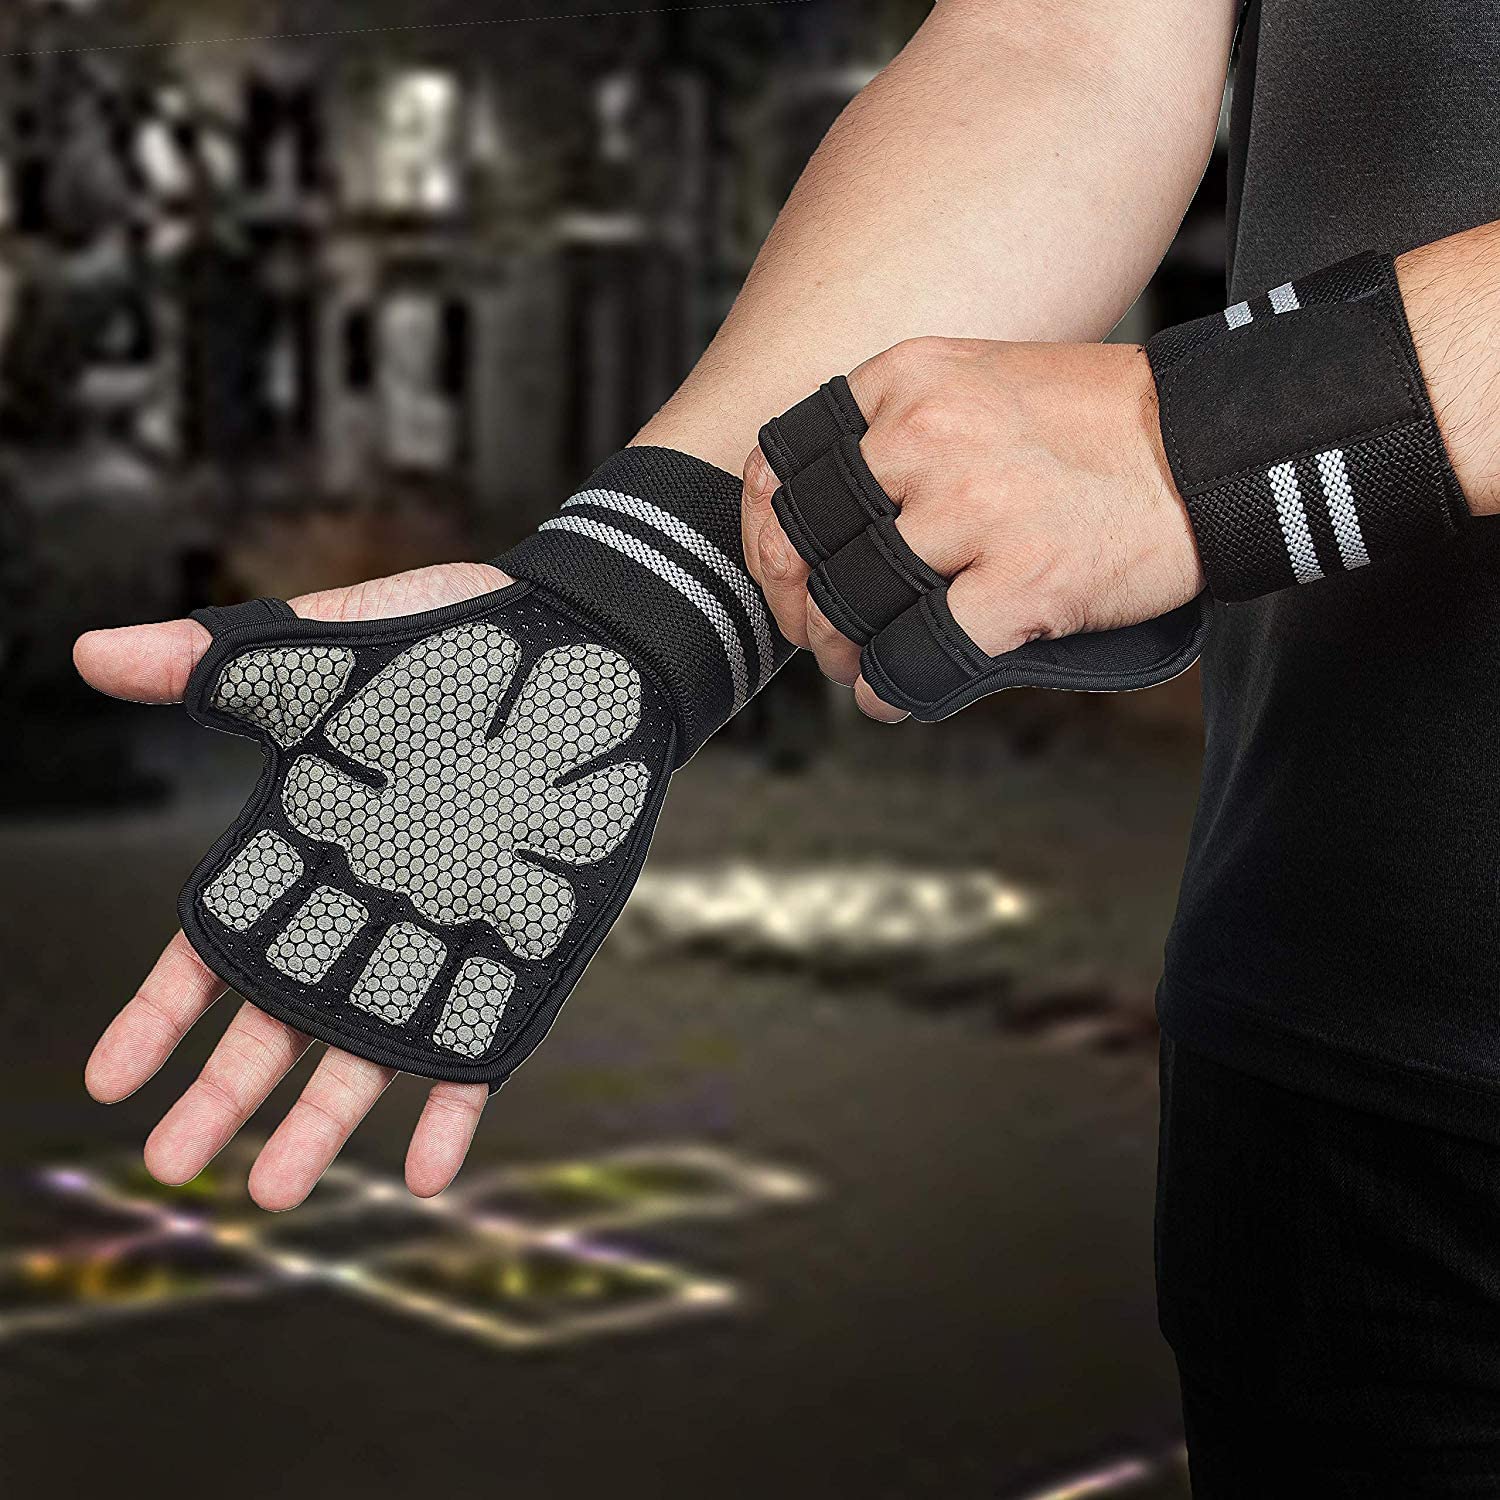 Gym Gloves for Weight Lifting Crossfit Fitness Workout Exercise Hand G –  Hykes